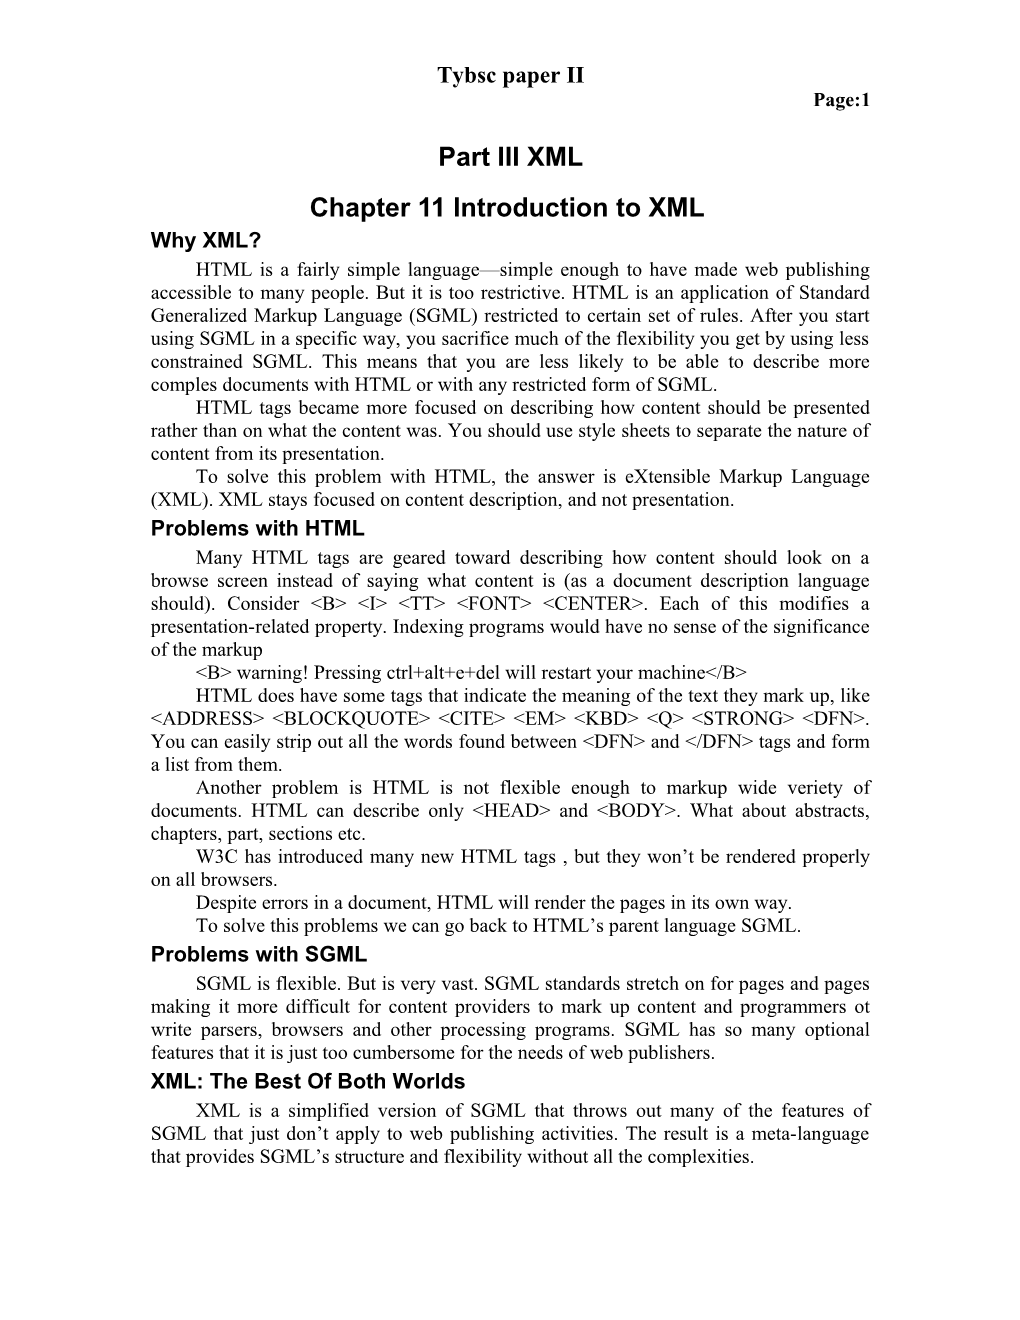 Chapter 11 Introduction to XML